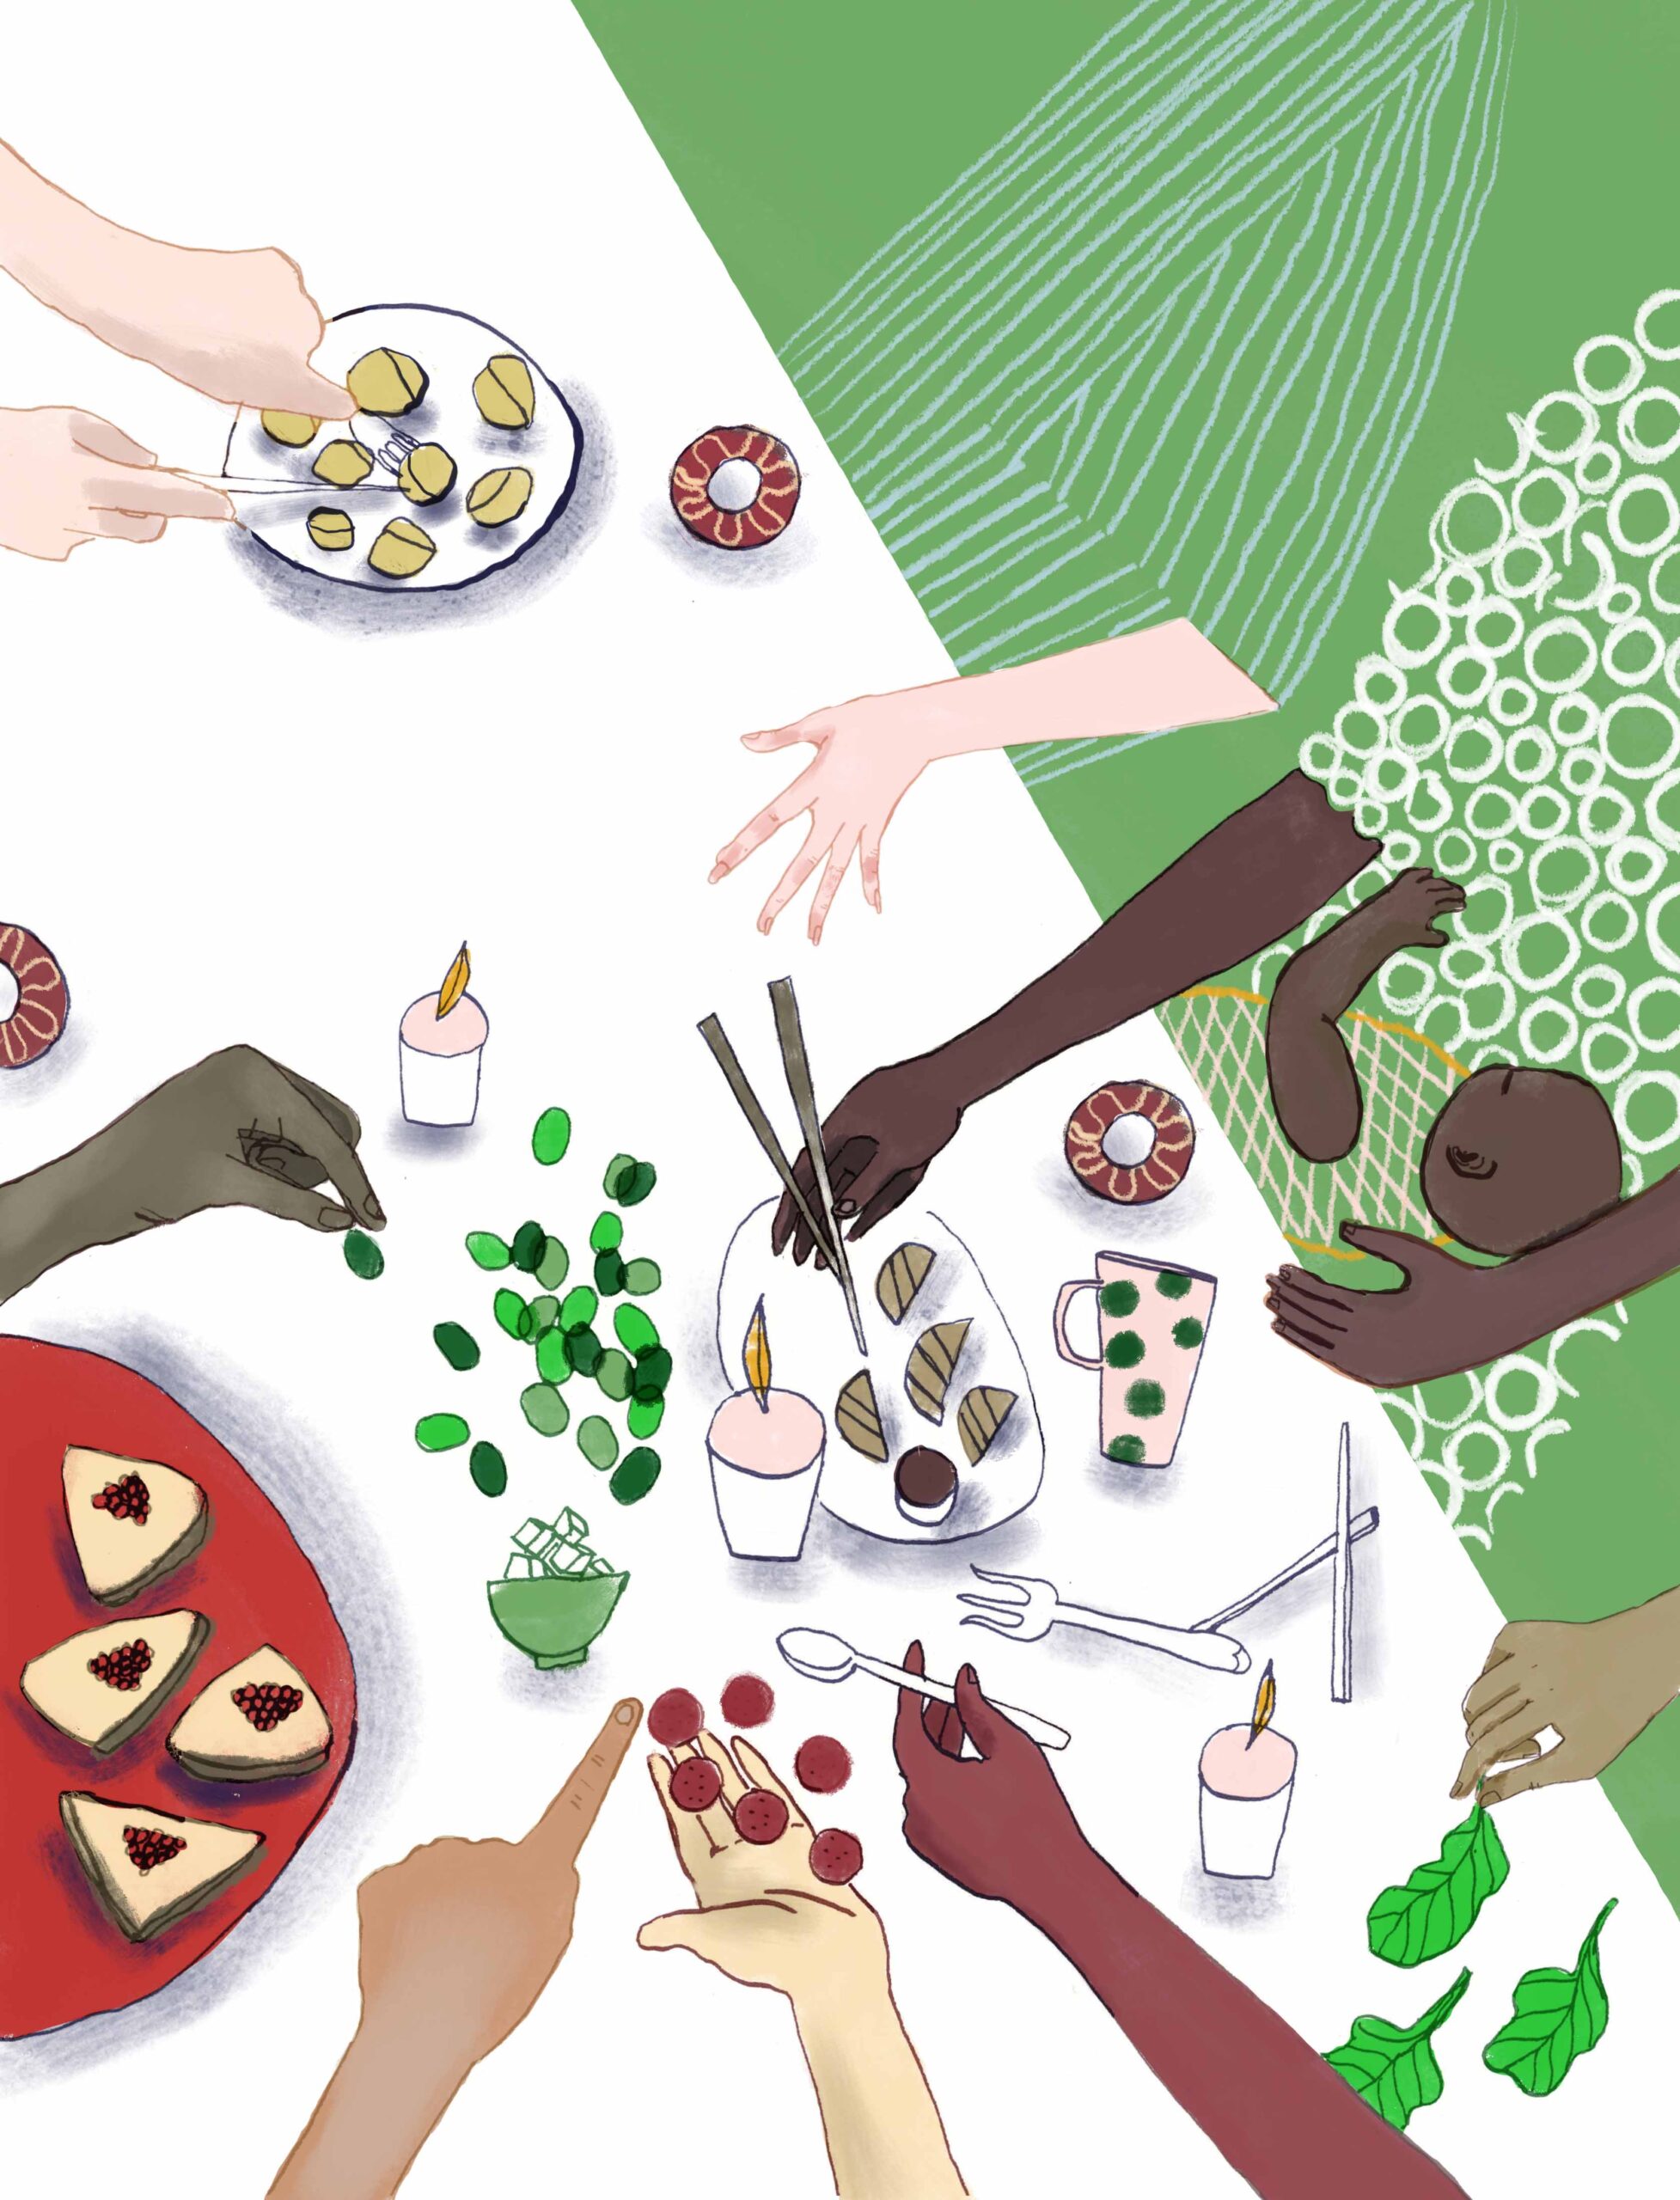 an illustration of different color hands reaching around a table full of food